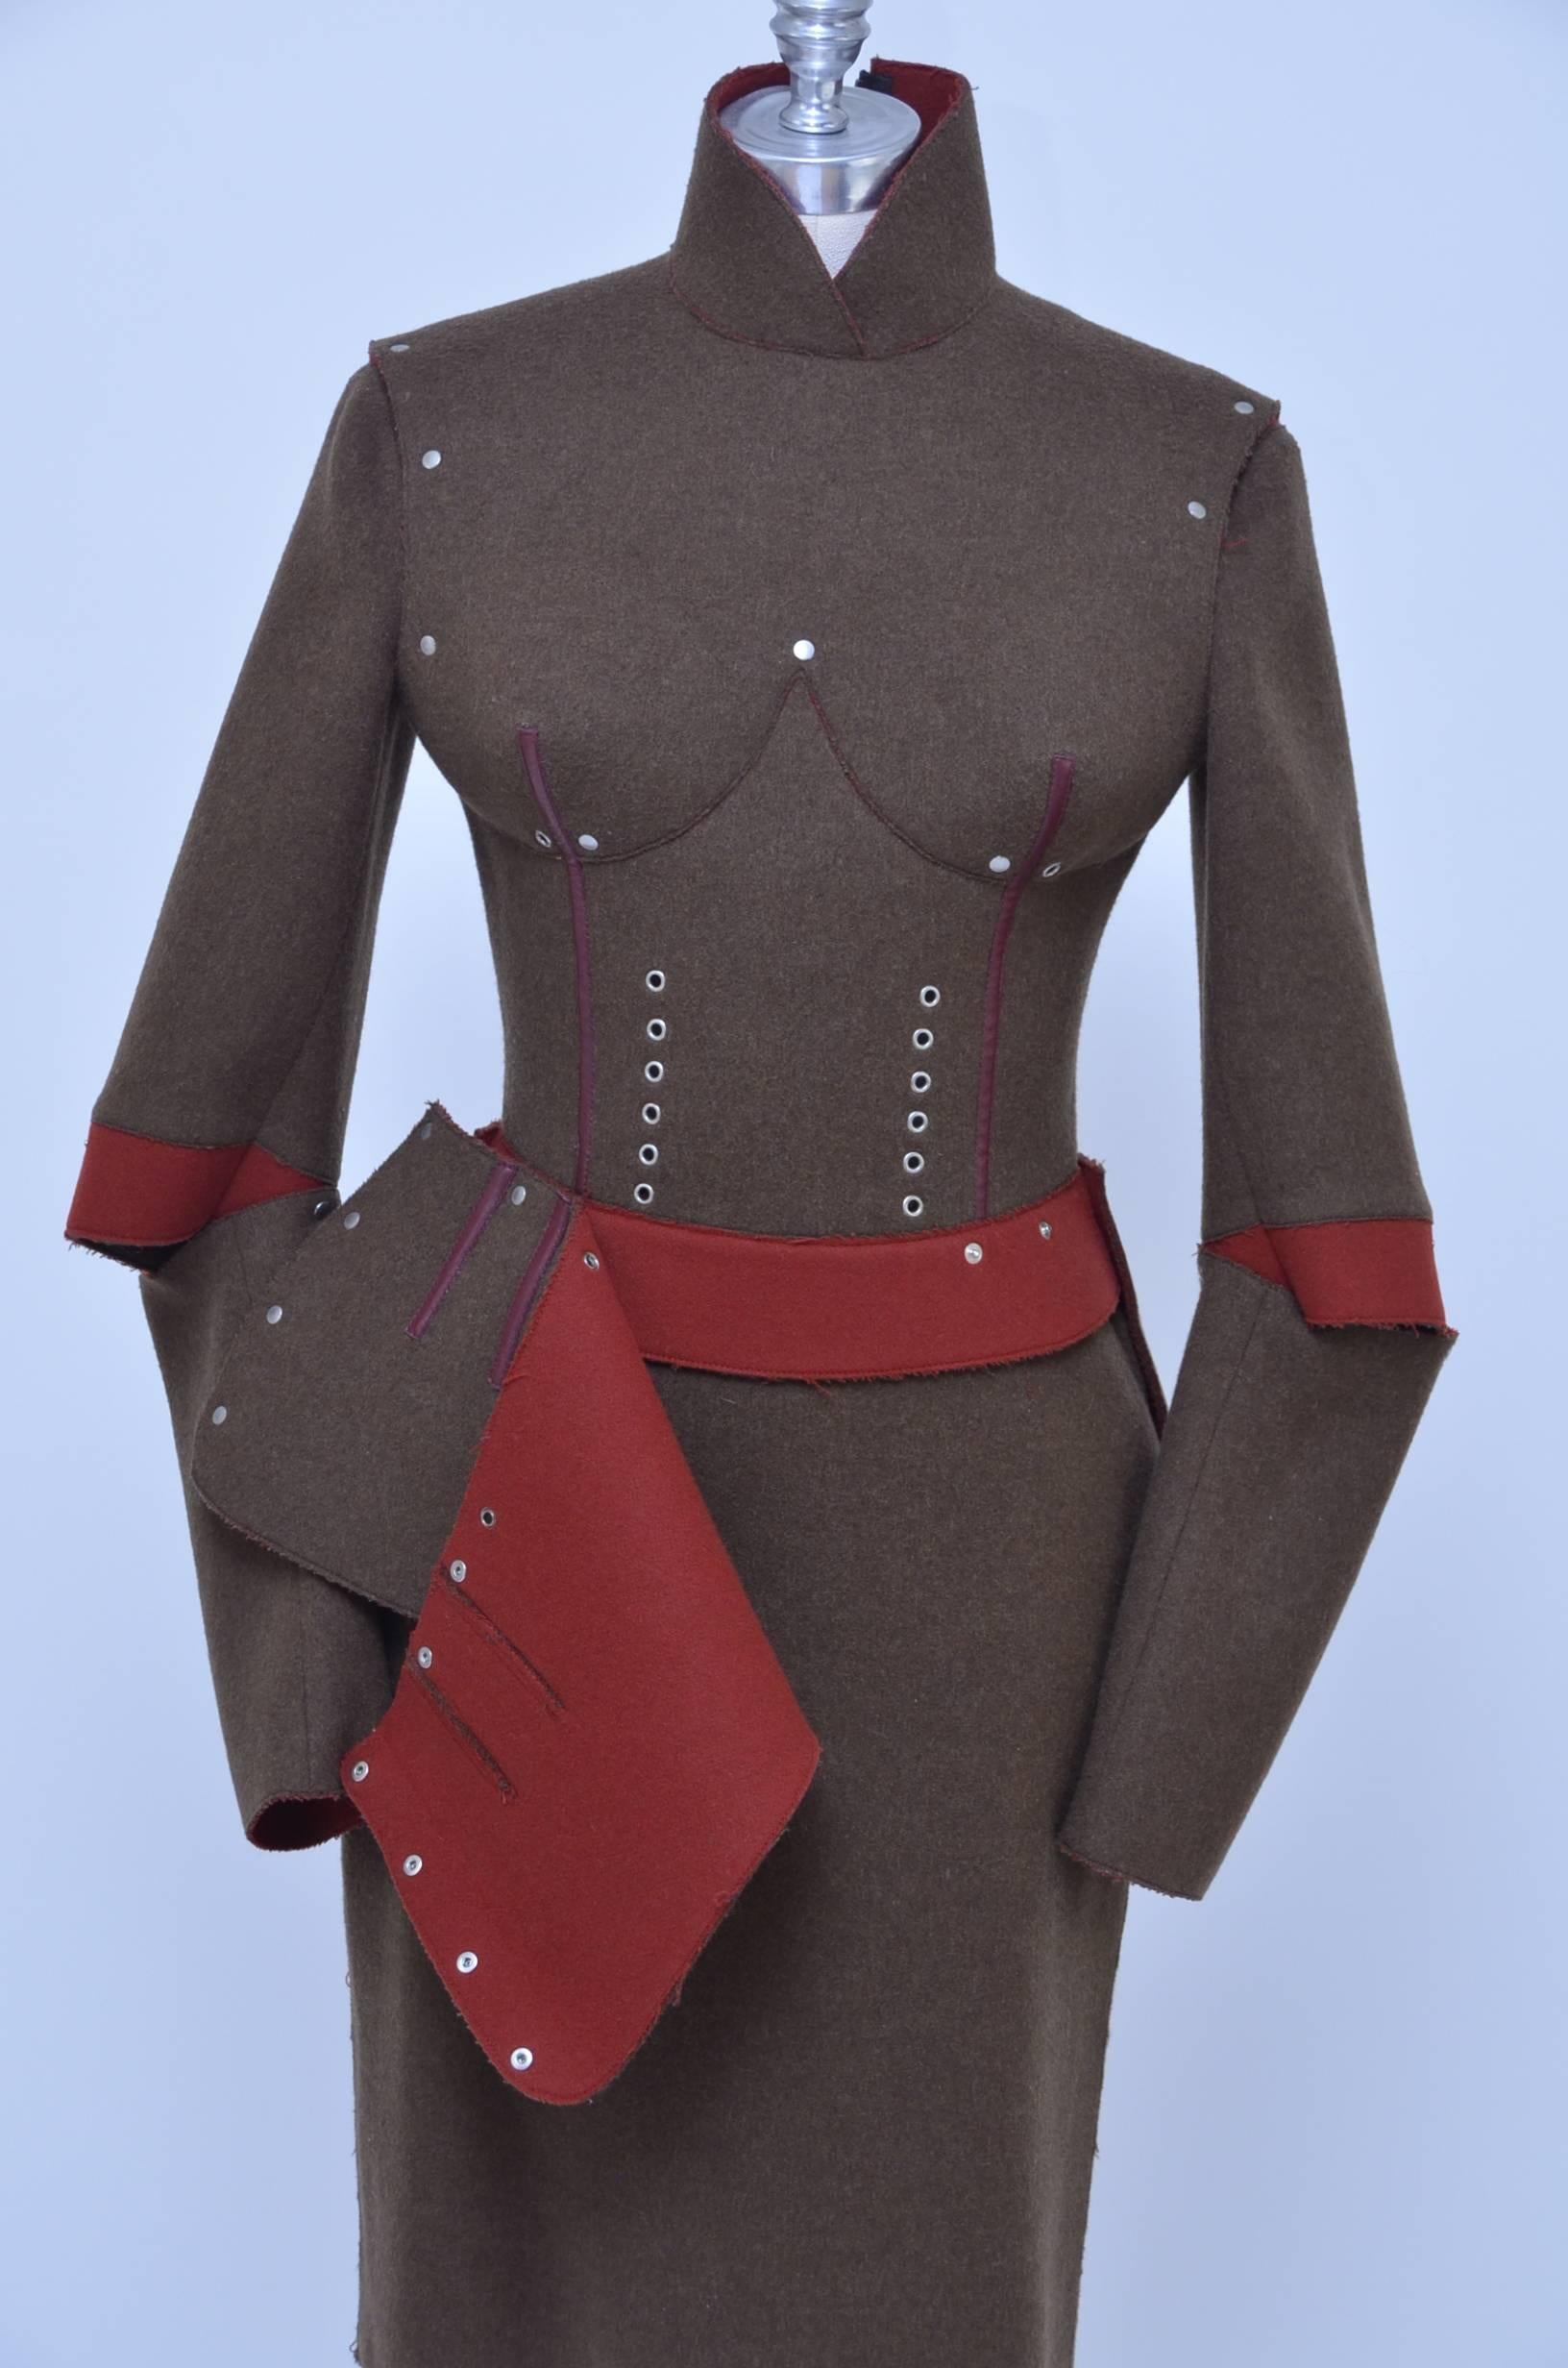 Jean Paul Gaultier Pour Gibo iconic breast cone suit.
Design and details on this rare suit is absolutely amazing and it a great piece to be exhibited at museums.
High collar jacket,zipper closure on the back and padded breast cone's inside for 